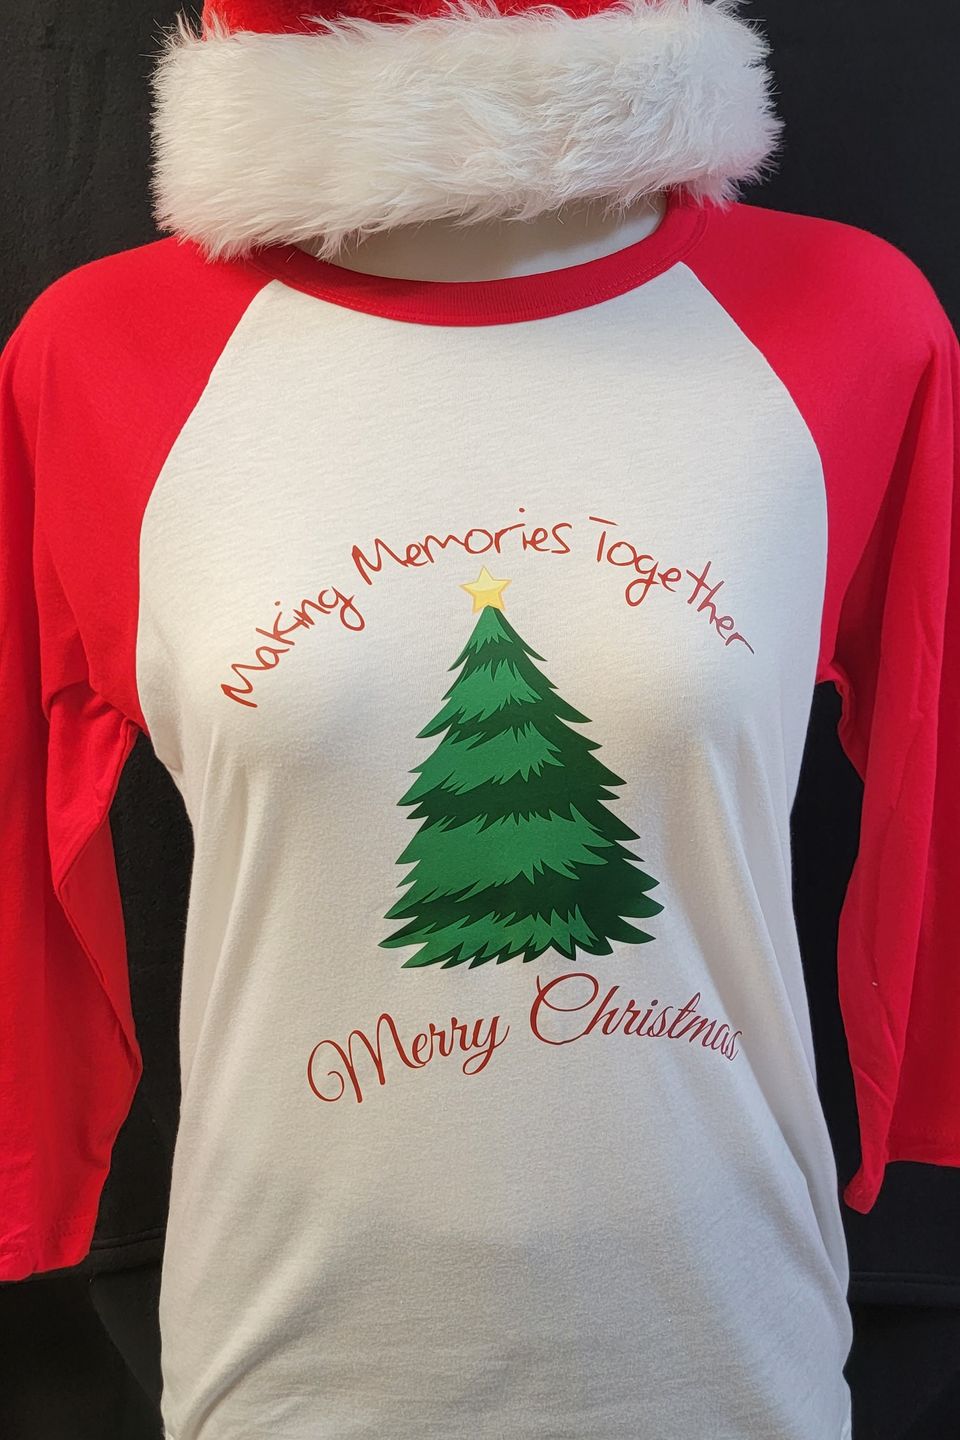 "DTF Direct-to-Film" example T-shirt - "Making memories together" - Merry Christmas